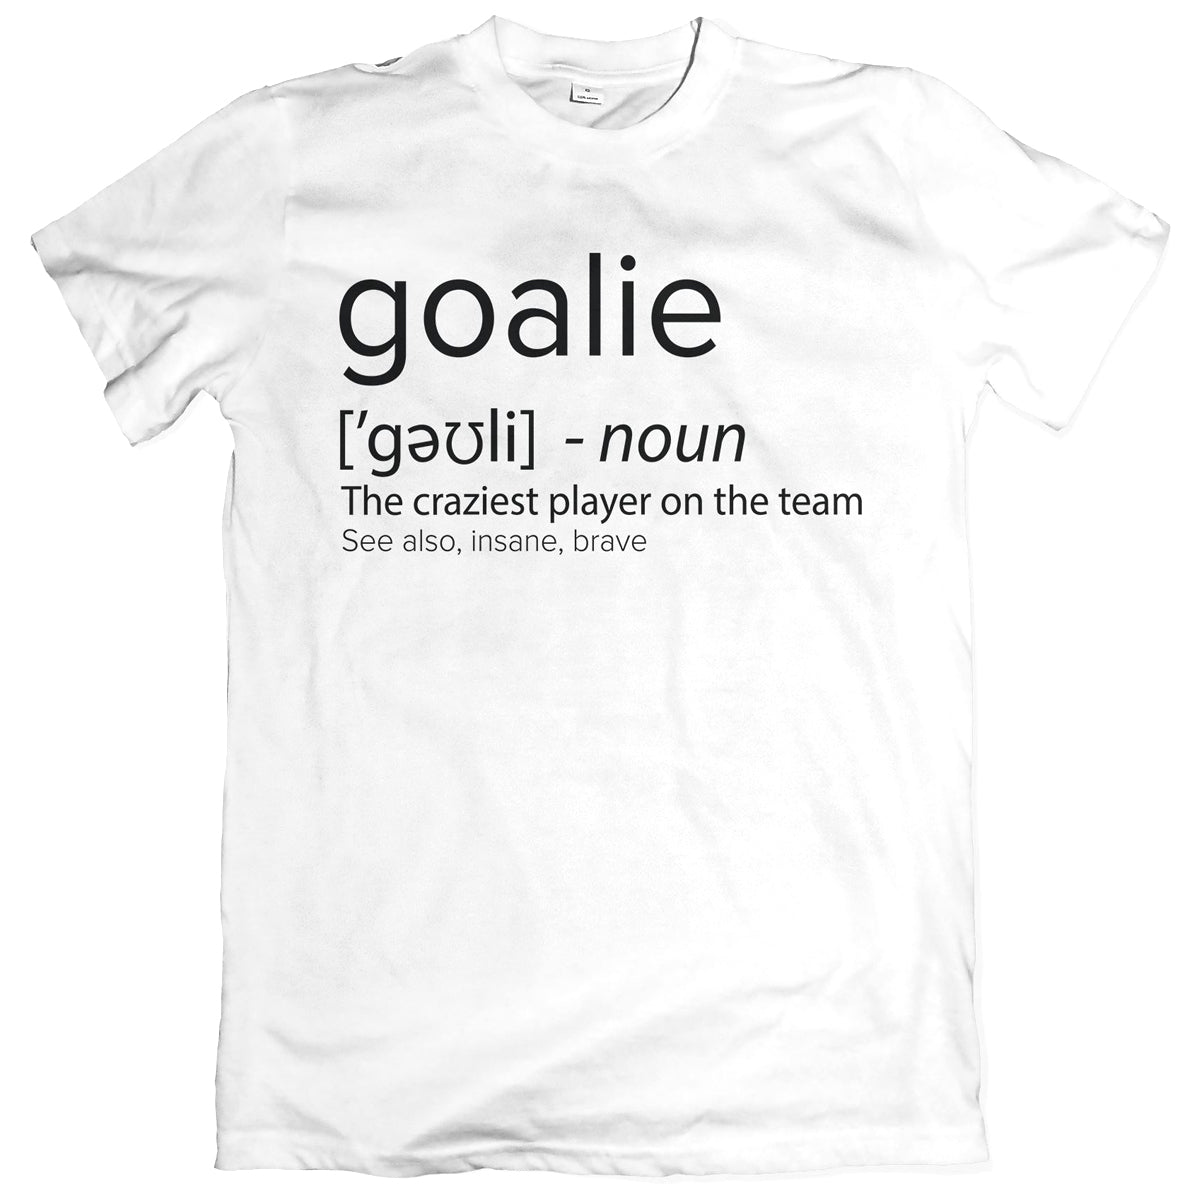 Goalie Definition T-Shirt Shirts 411 Youth Small White 